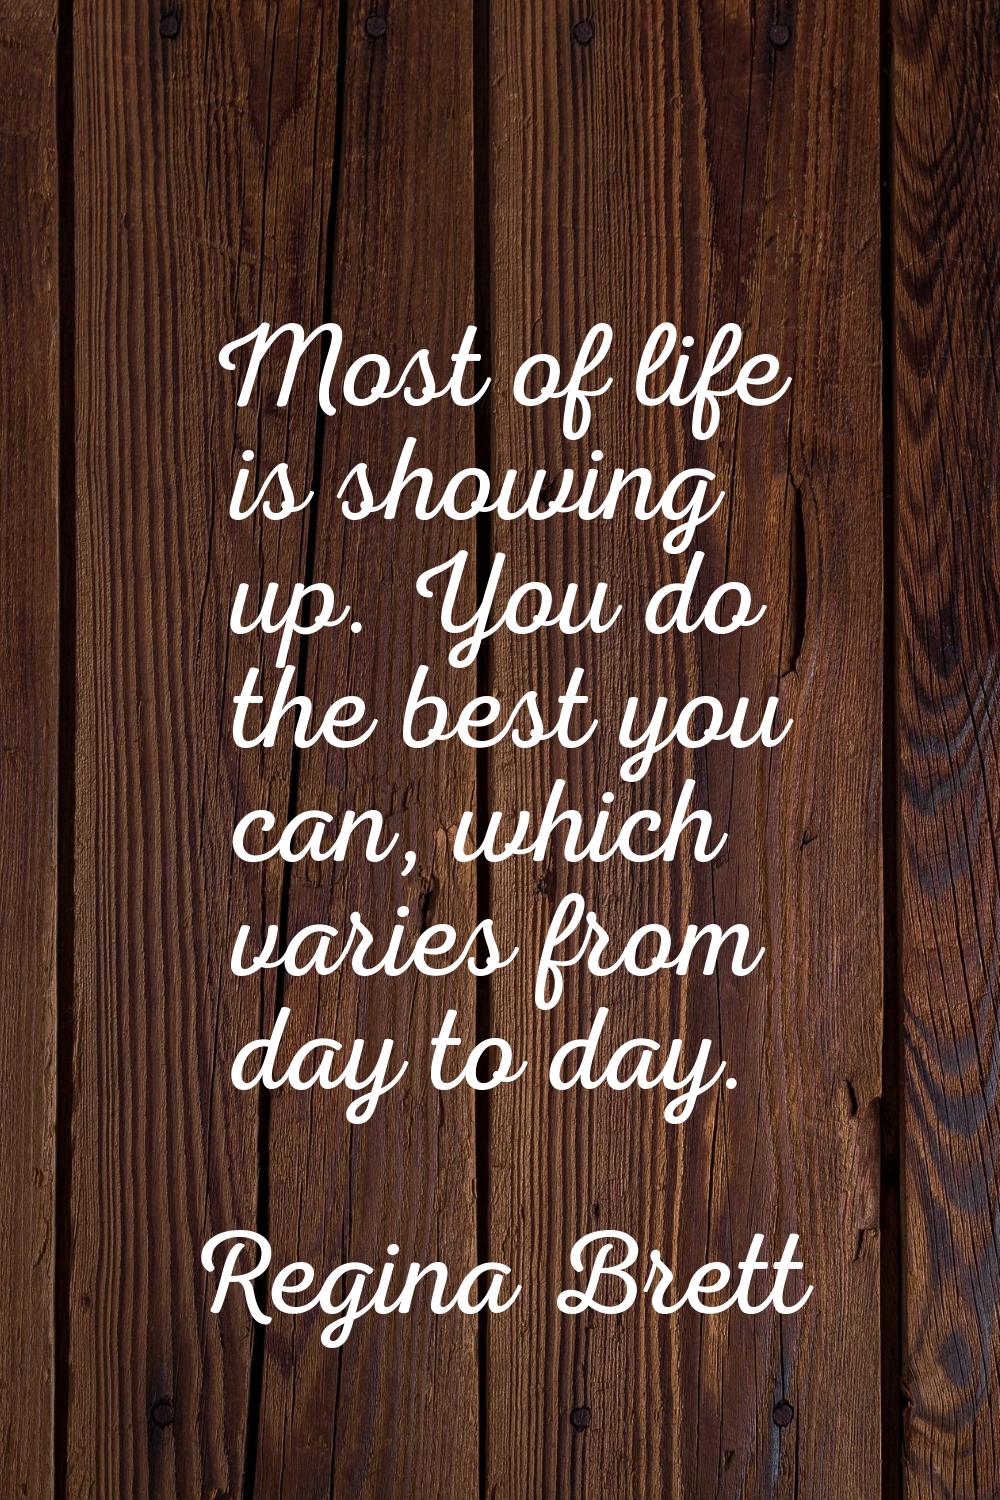 Most of life is showing up. You do the best you can, which varies from day to day.